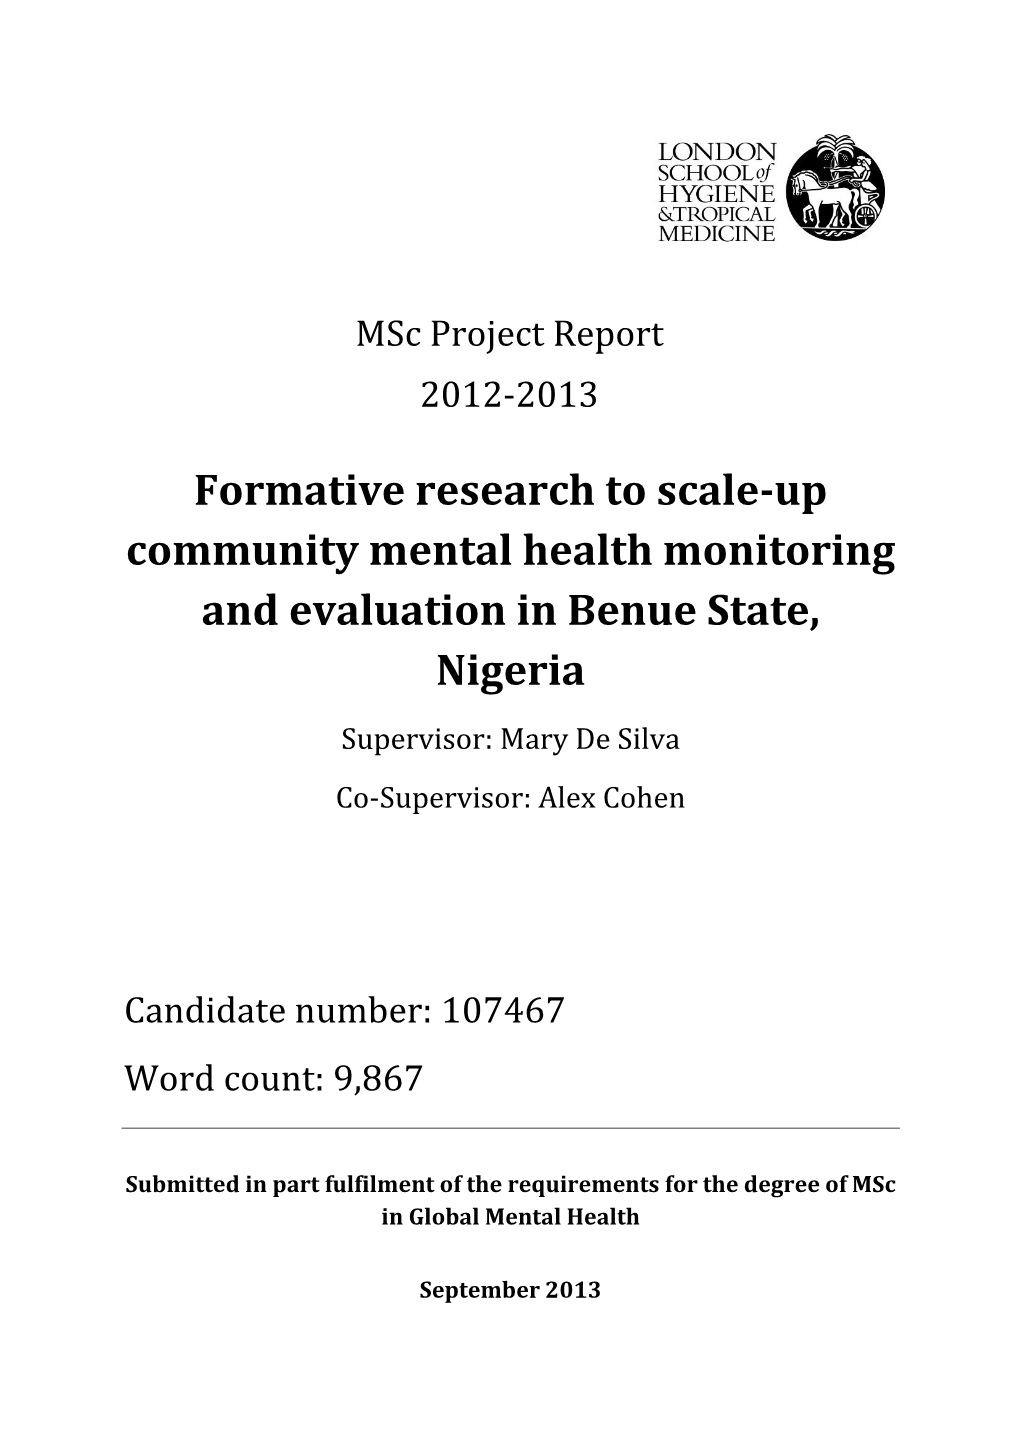 Formative Research to Scale-Up Community Mental Health Monitoring and Evaluation in Benue State, Nigeria Supervisor: Mary De Silva Co-Supervisor: Alex Cohen